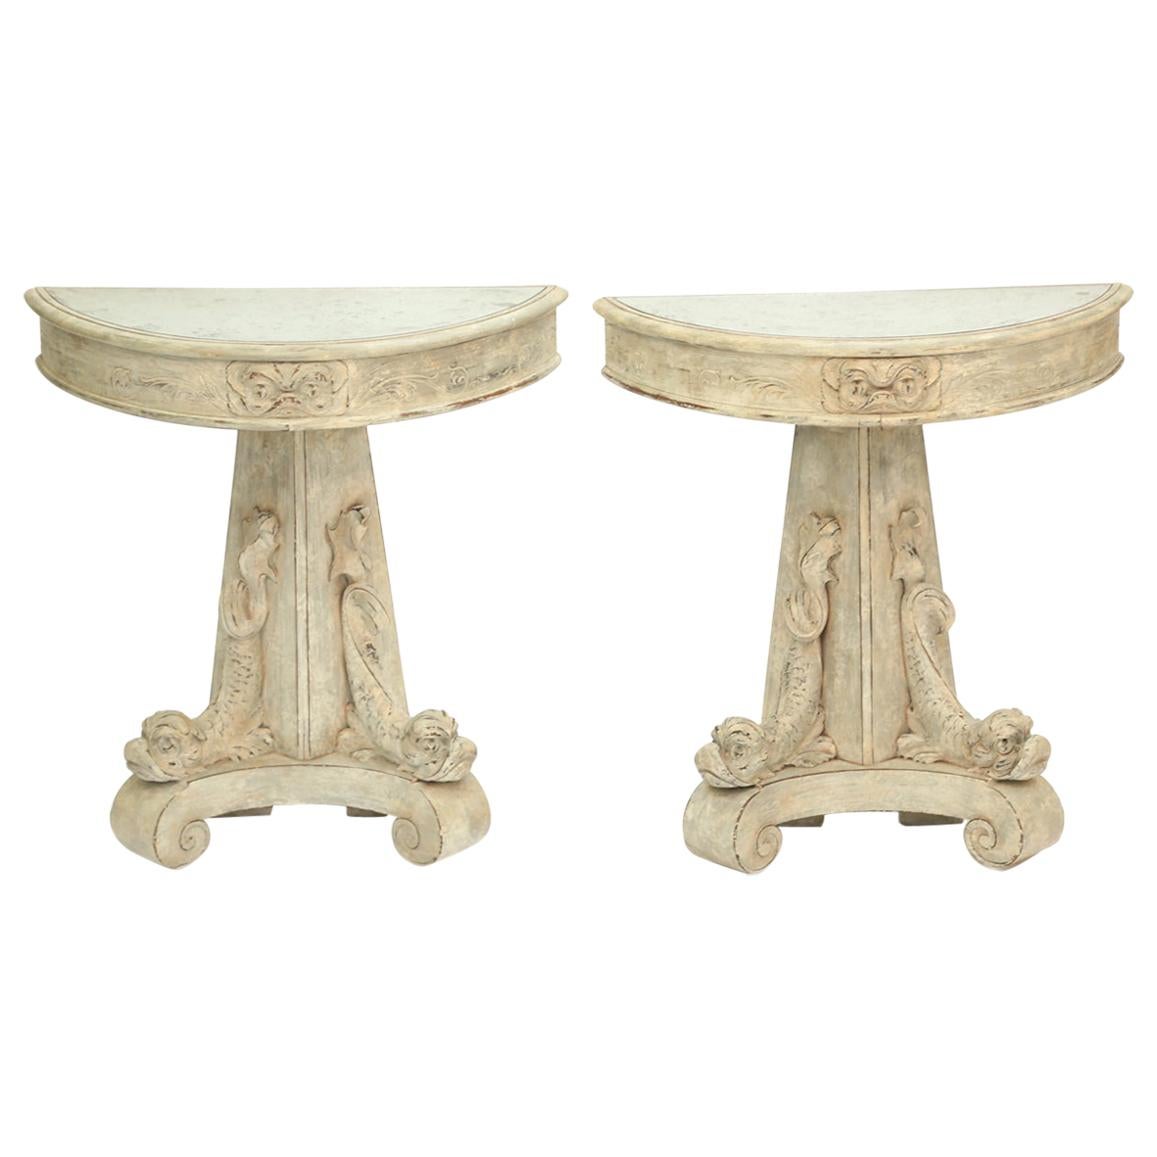 Pair of Painted Demilune Dolphin Consoles with Mirrored Tops